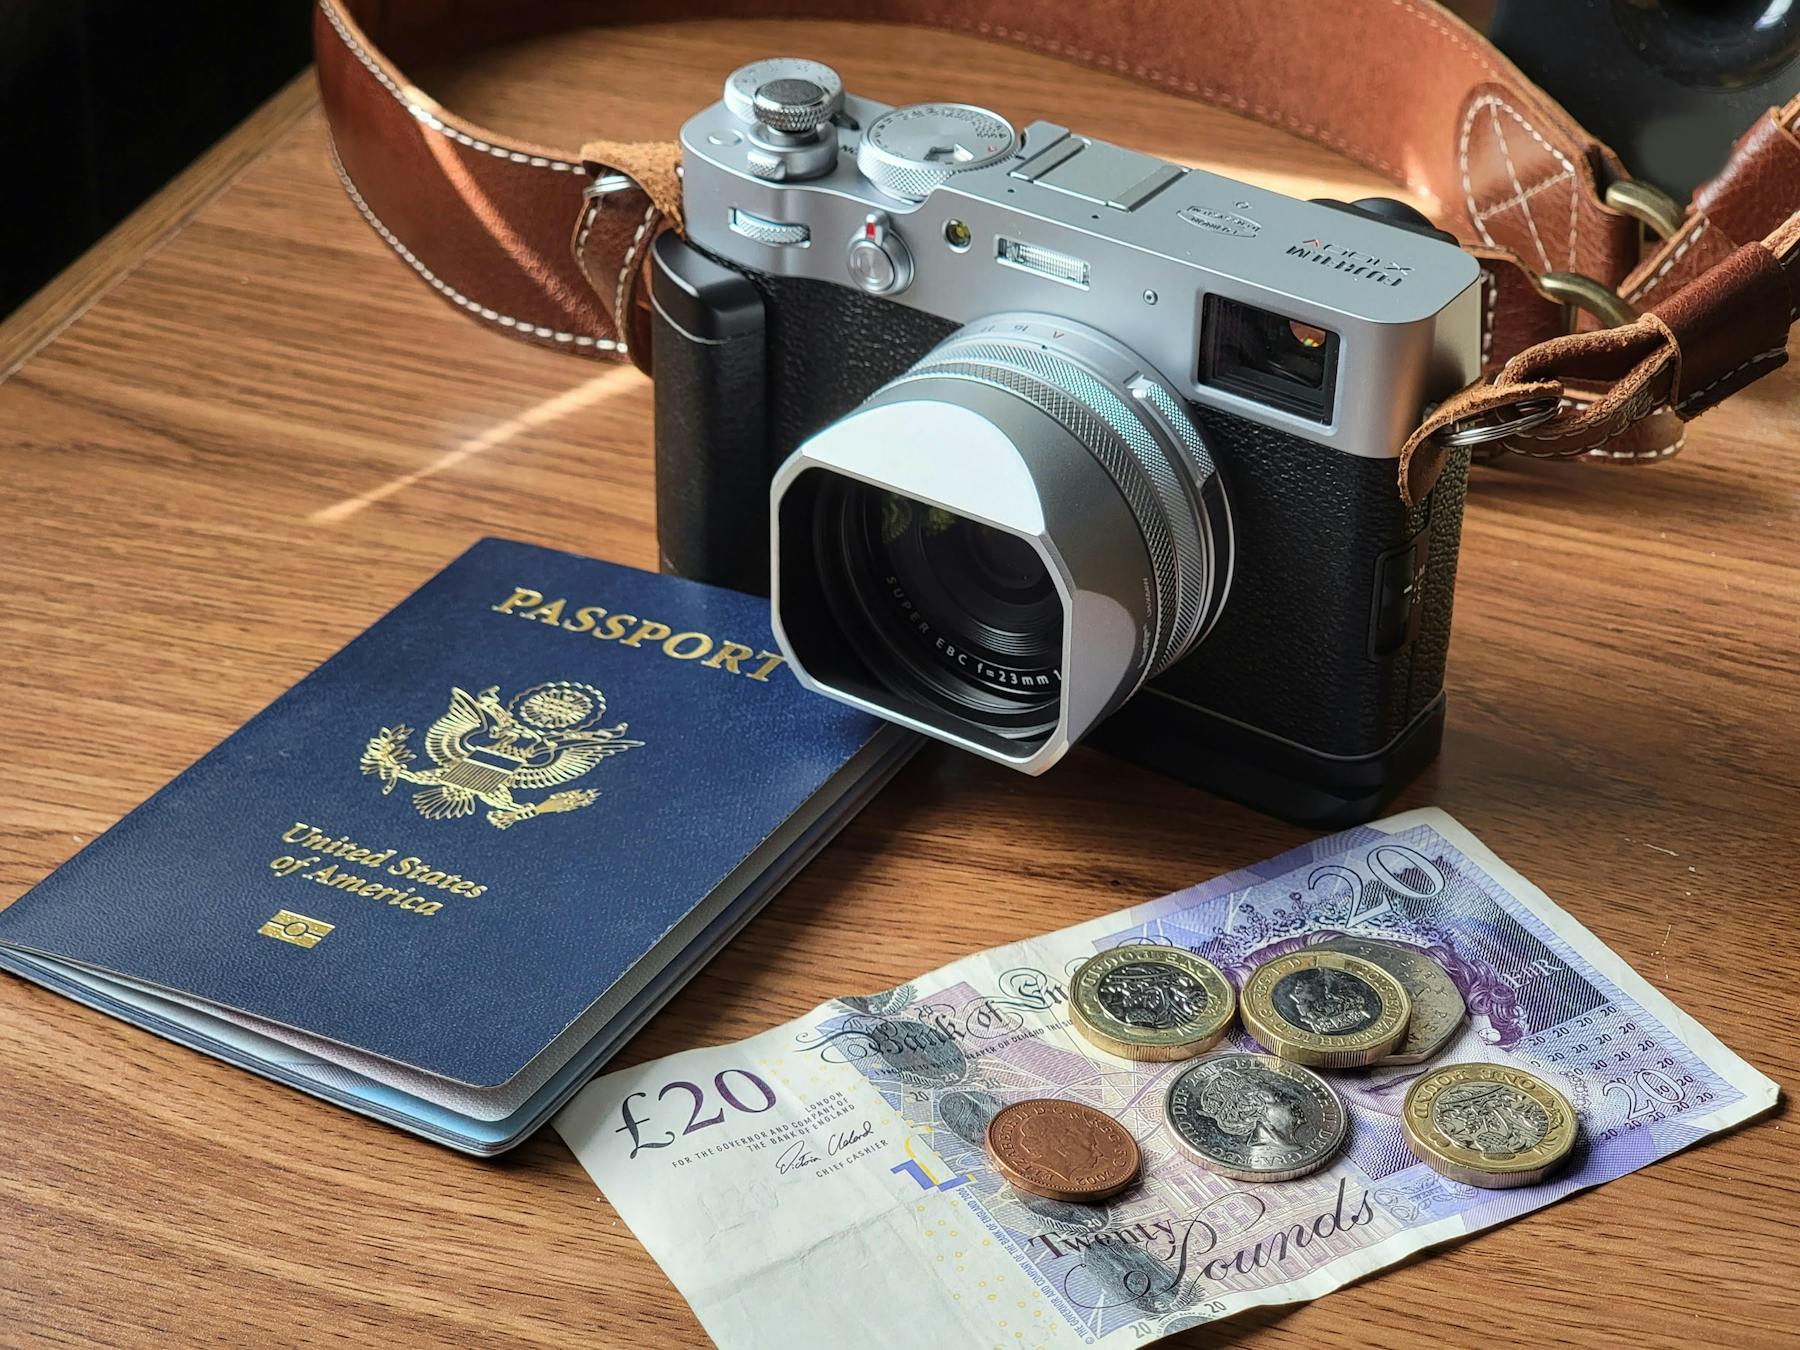 A DSLR camera next to a passport and foreign currency